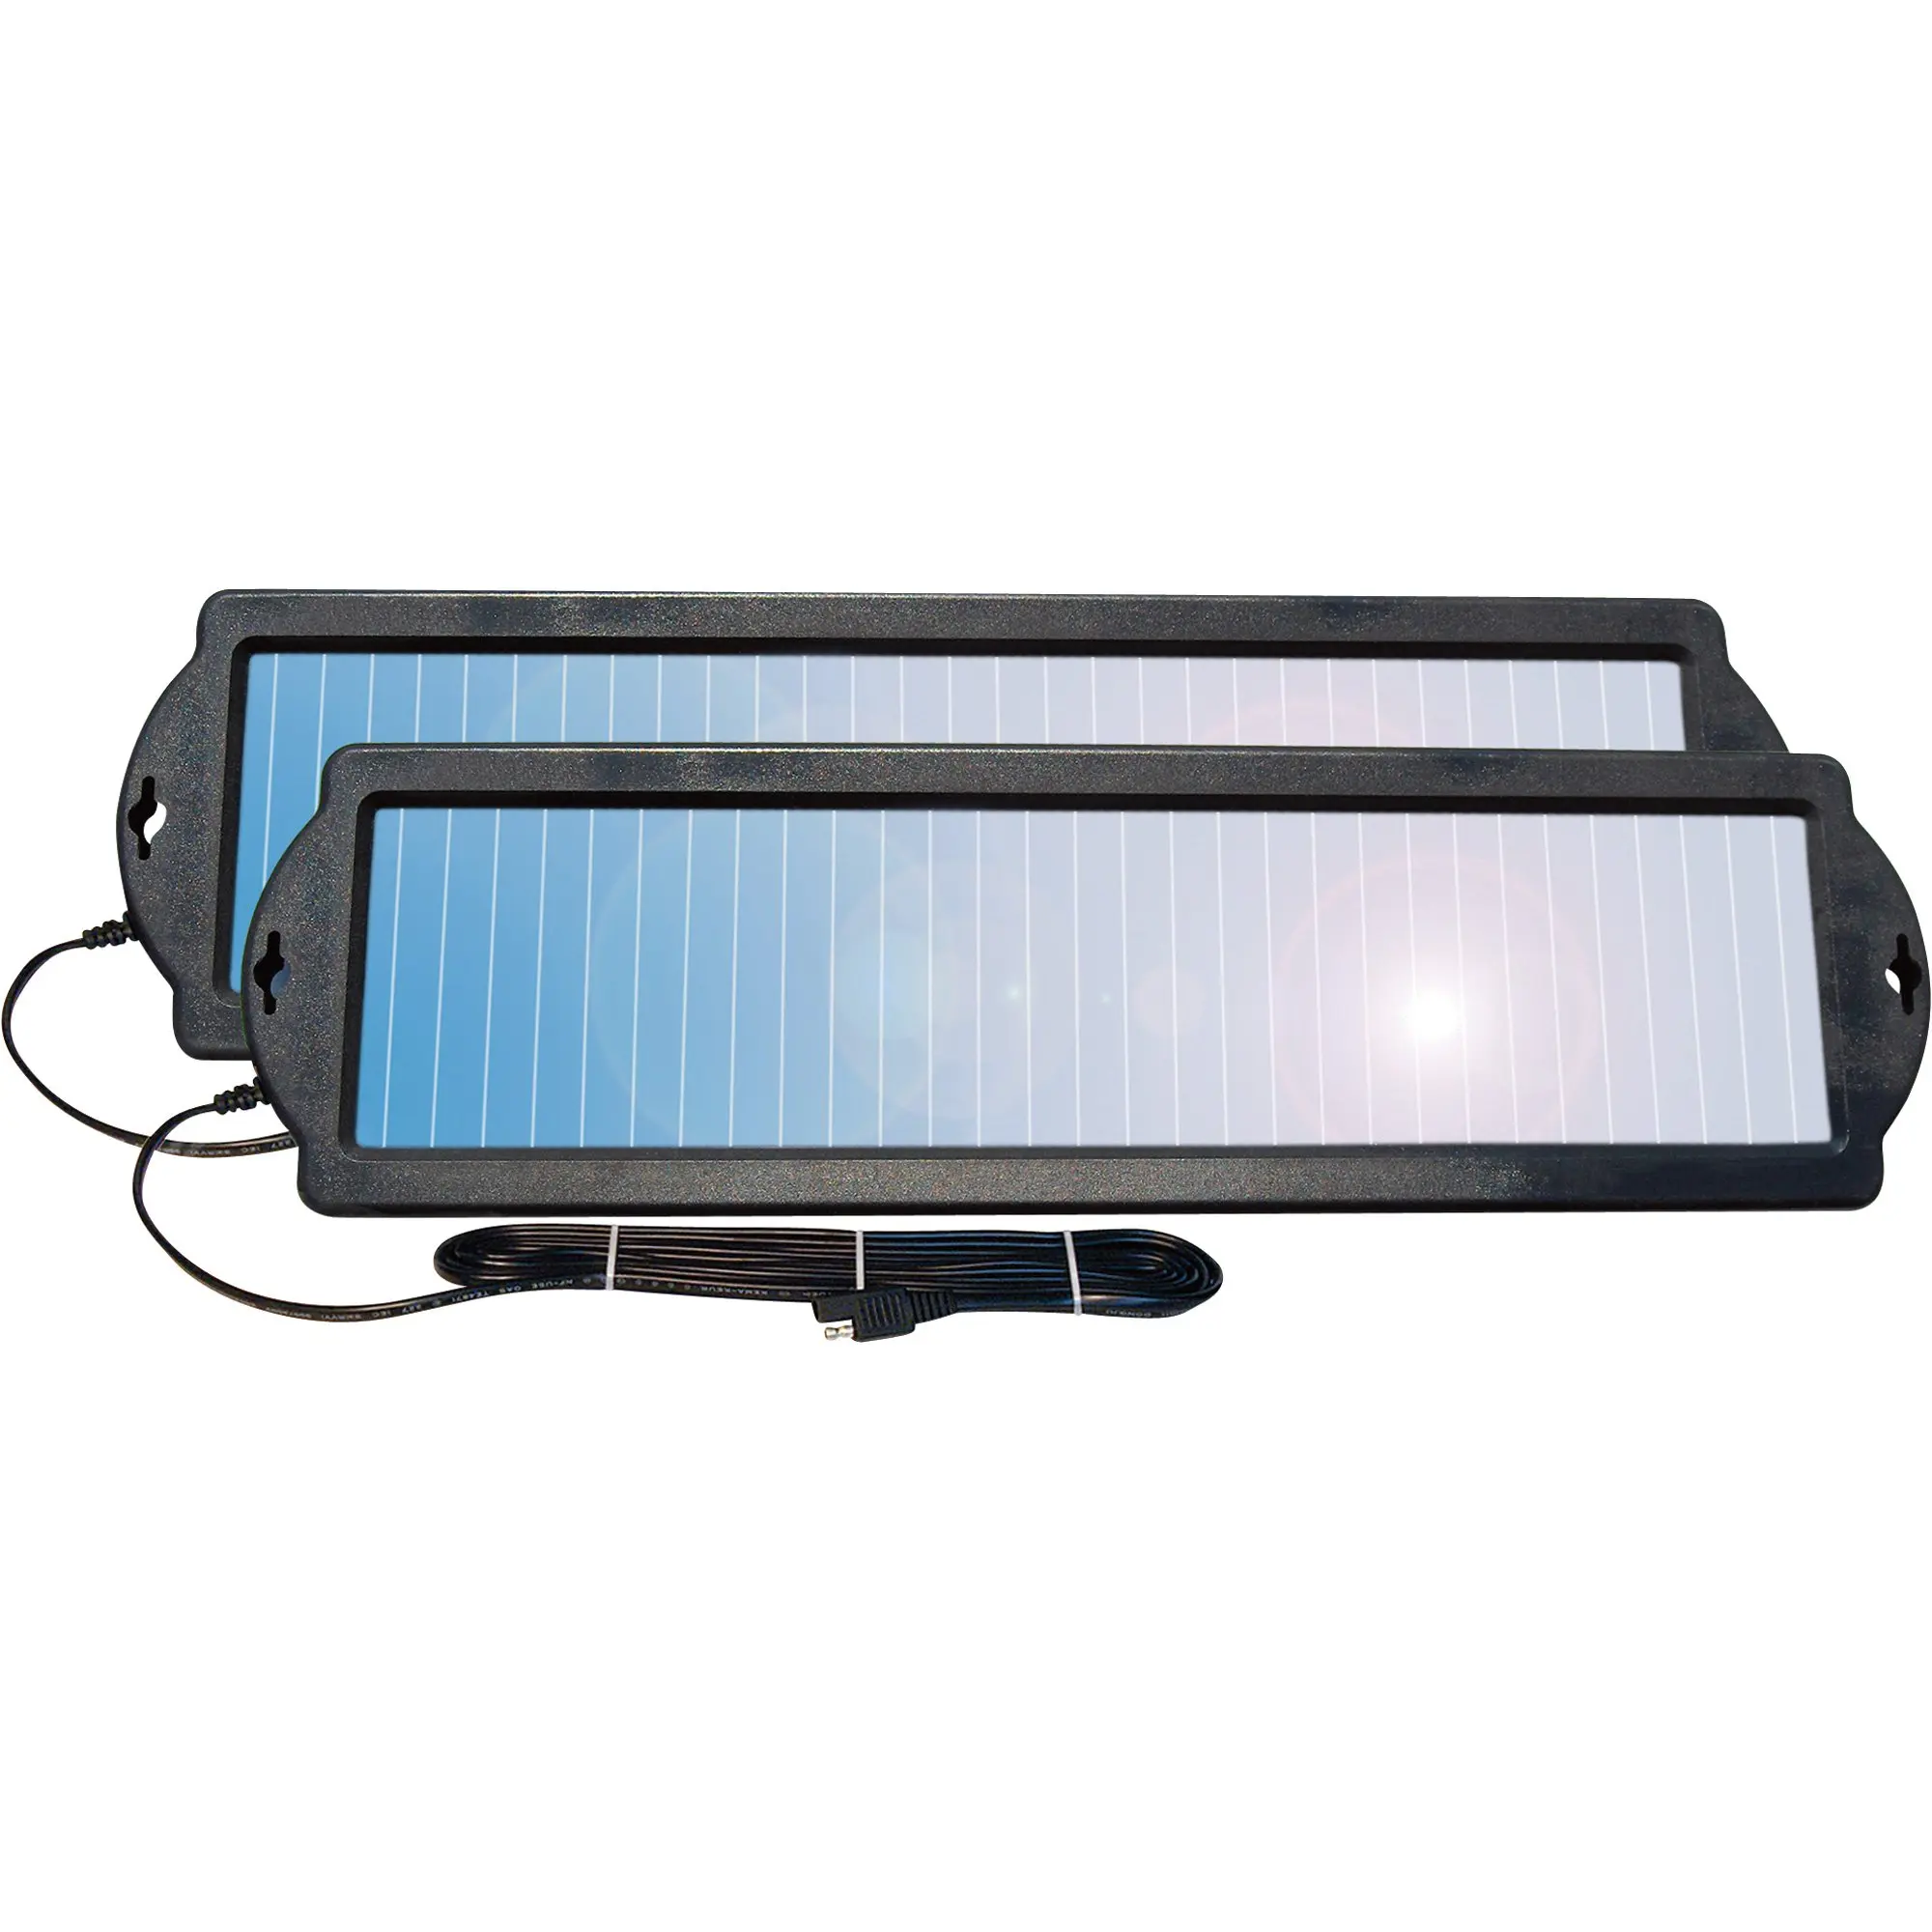 coleman 5w solar panel 12v battery charger - Can a 5W solar panel charge a 12V battery